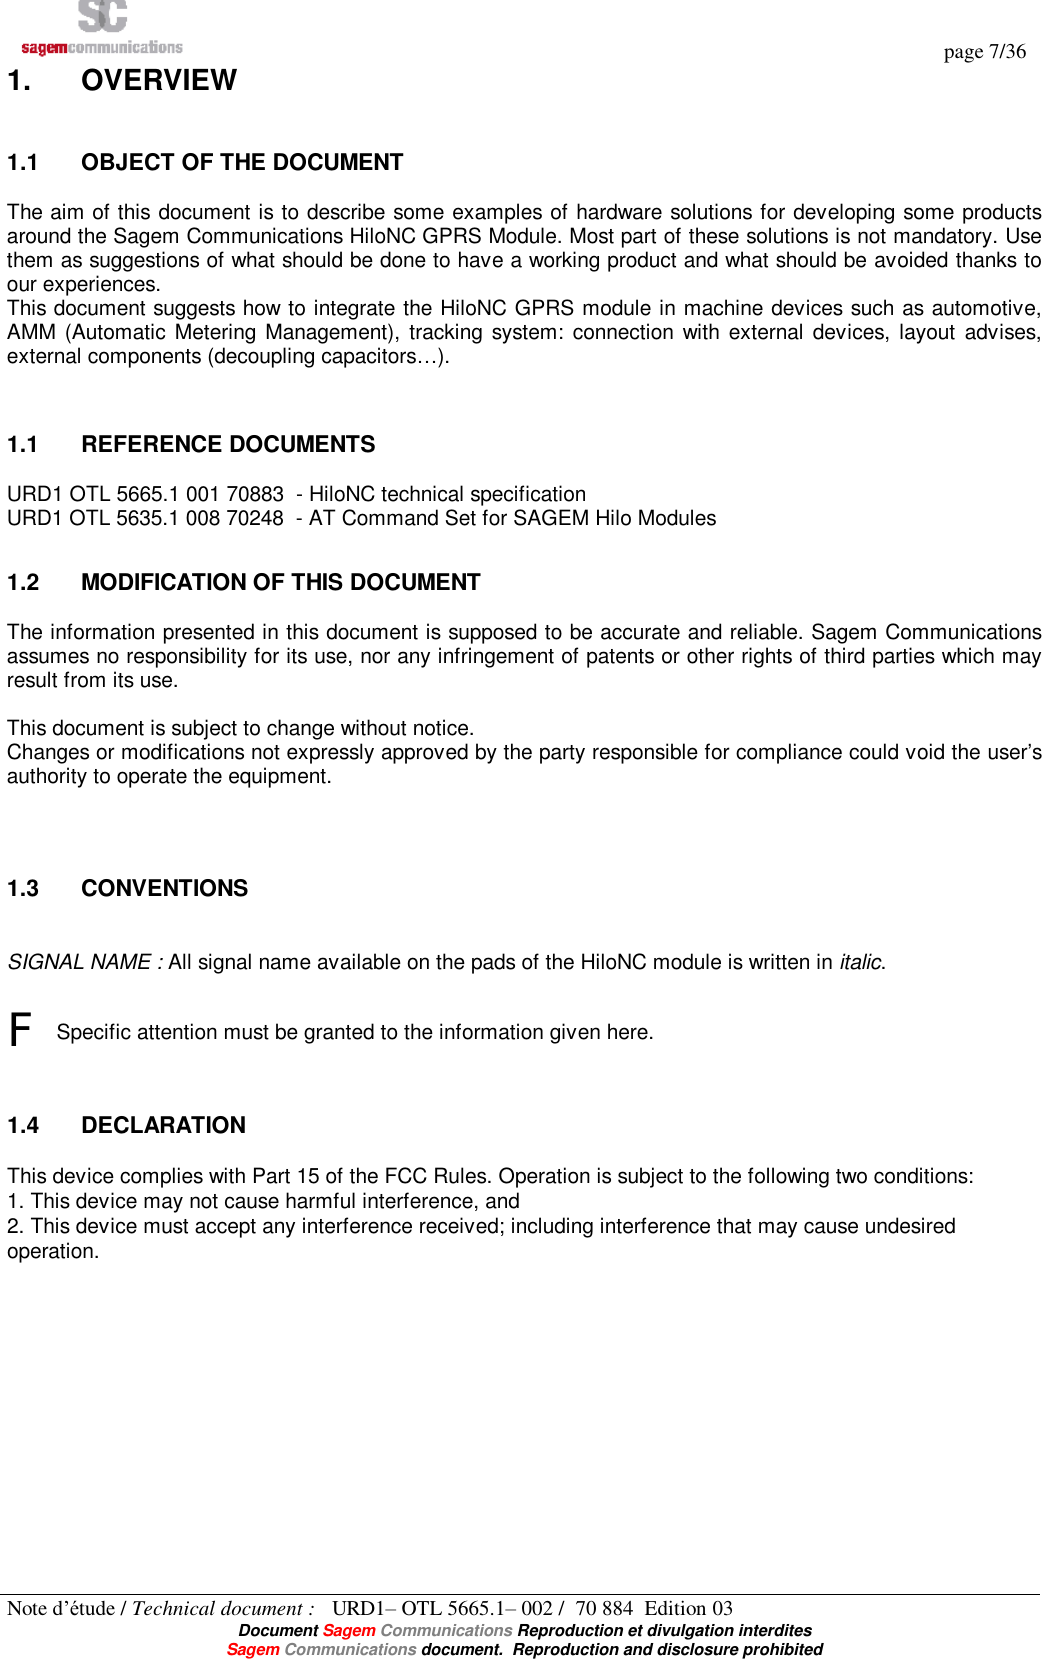   page 7/36 Note d’étude / Technical document :   URD1– OTL 5665.1– 002 /  70 884  Edition 03  Document Sagem Communications Reproduction et divulgation interdites Sagem Communications document.  Reproduction and disclosure prohibited 1.  OVERVIEW 1.1  OBJECT OF THE DOCUMENT The aim of this document is to describe some examples of hardware solutions for developing some products around the Sagem Communications HiloNC GPRS Module. Most part of these solutions is not mandatory. Use them as suggestions of what should be done to have a working product and what should be avoided thanks to our experiences. This document suggests how to integrate the HiloNC GPRS module in machine devices such as automotive, AMM (Automatic Metering Management), tracking system: connection with external devices, layout advises, external components (decoupling capacitors…).  1.1  REFERENCE DOCUMENTS URD1 OTL 5665.1 001 70883  - HiloNC technical specification URD1 OTL 5635.1 008 70248  - AT Command Set for SAGEM Hilo Modules 1.2  MODIFICATION OF THIS DOCUMENT The information presented in this document is supposed to be accurate and reliable. Sagem Communications assumes no responsibility for its use, nor any infringement of patents or other rights of third parties which may result from its use.  This document is subject to change without notice. Changes or modifications not expressly approved by the party responsible for compliance could void the user’s authority to operate the equipment.   1.3  CONVENTIONS  SIGNAL NAME : All signal name available on the pads of the HiloNC module is written in italic.  F Specific attention must be granted to the information given here.  1.4  DECLARATION This device complies with Part 15 of the FCC Rules. Operation is subject to the following two conditions:  1. This device may not cause harmful interference, and  2. This device must accept any interference received; including interference that may cause undesired operation. 